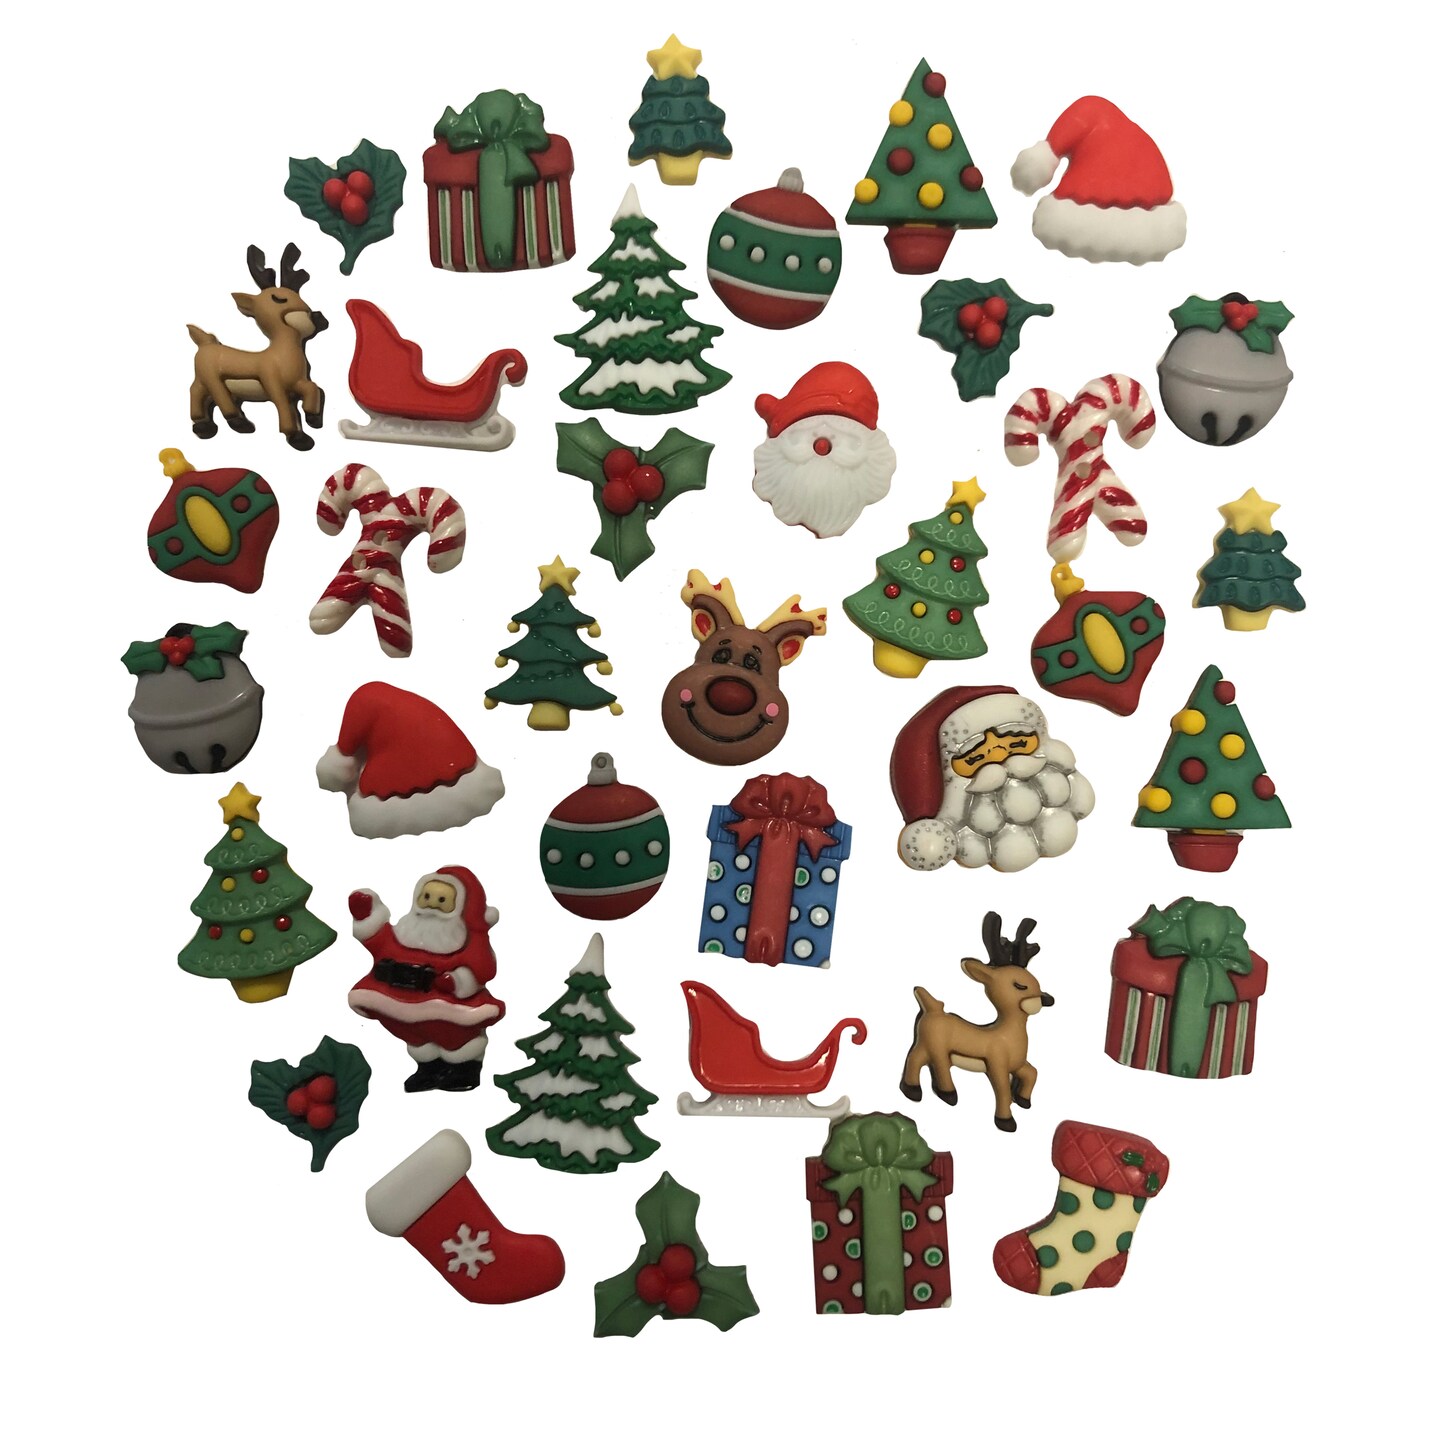 Holiday Ornaments Galore [Book]